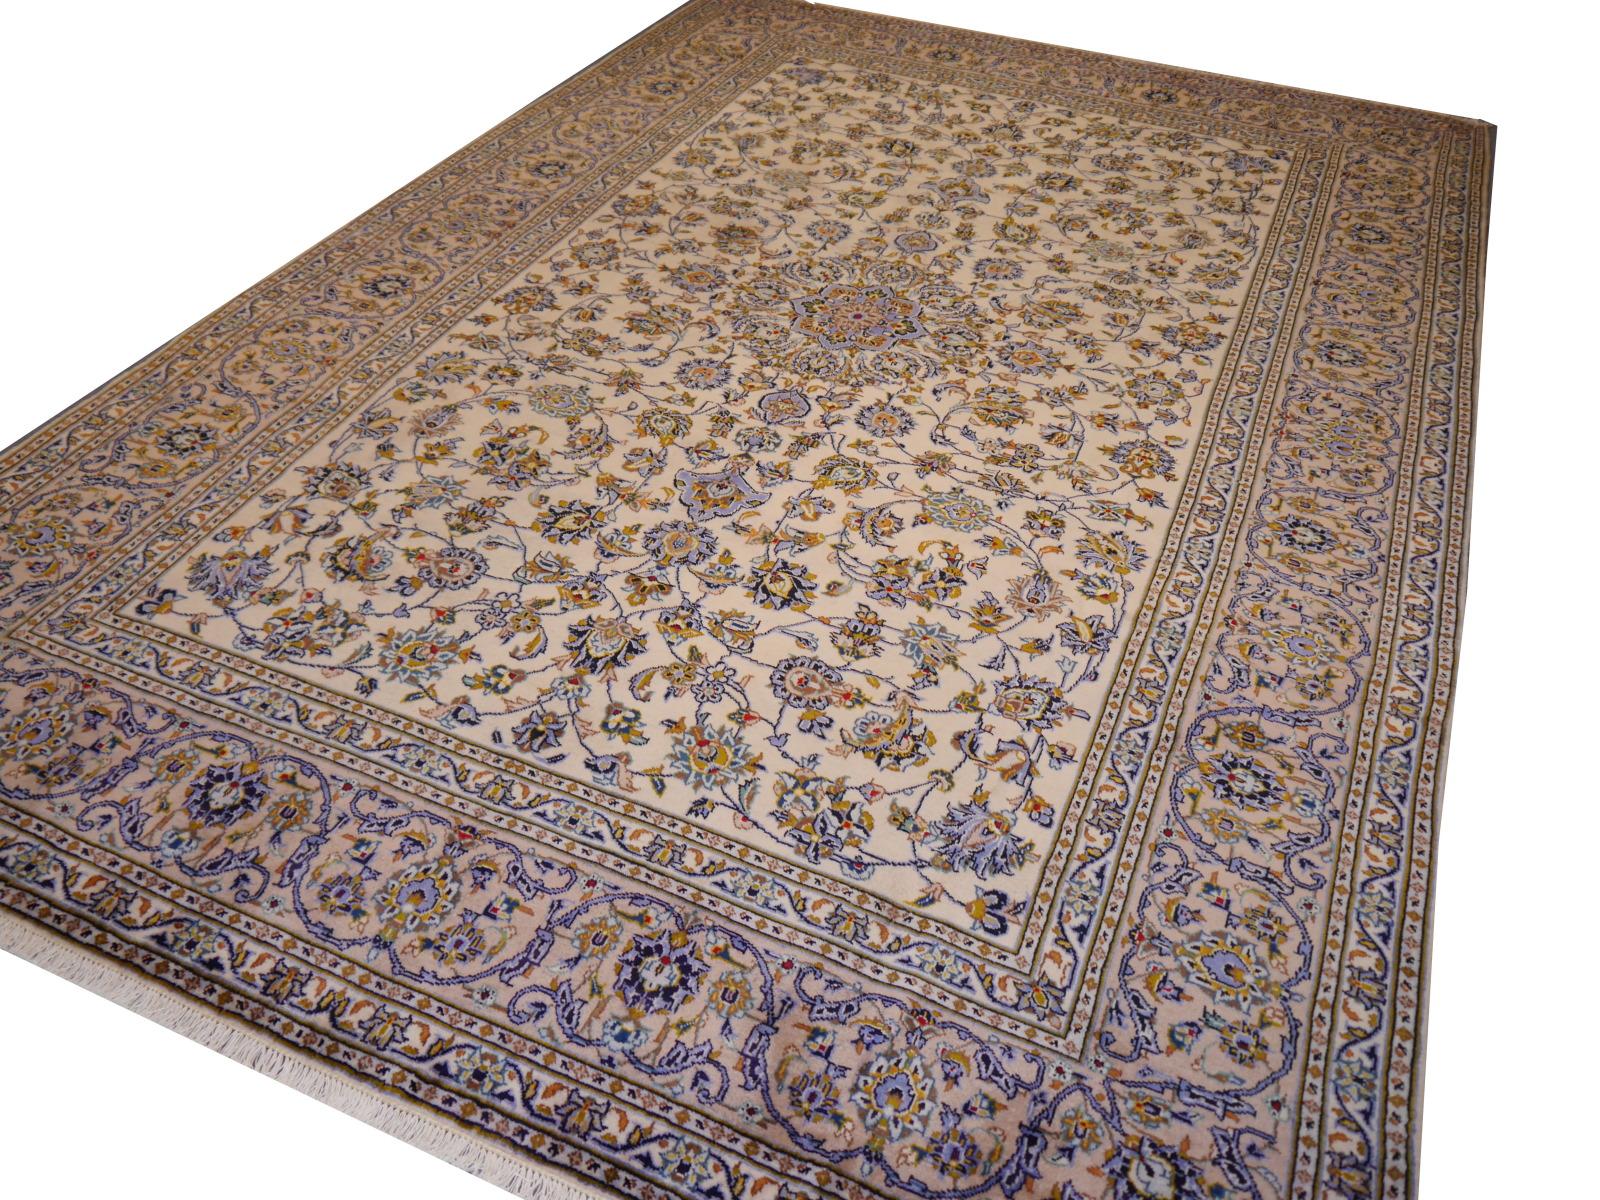 Stunning vintage oriental rug in beige and blue.

Oriental rugs and carpets are made of fine, hand-spun wool, 
This wonderful and stunning example has a light colored look. It is hand-knotted with wool, a sustainable material.

It has an elegant